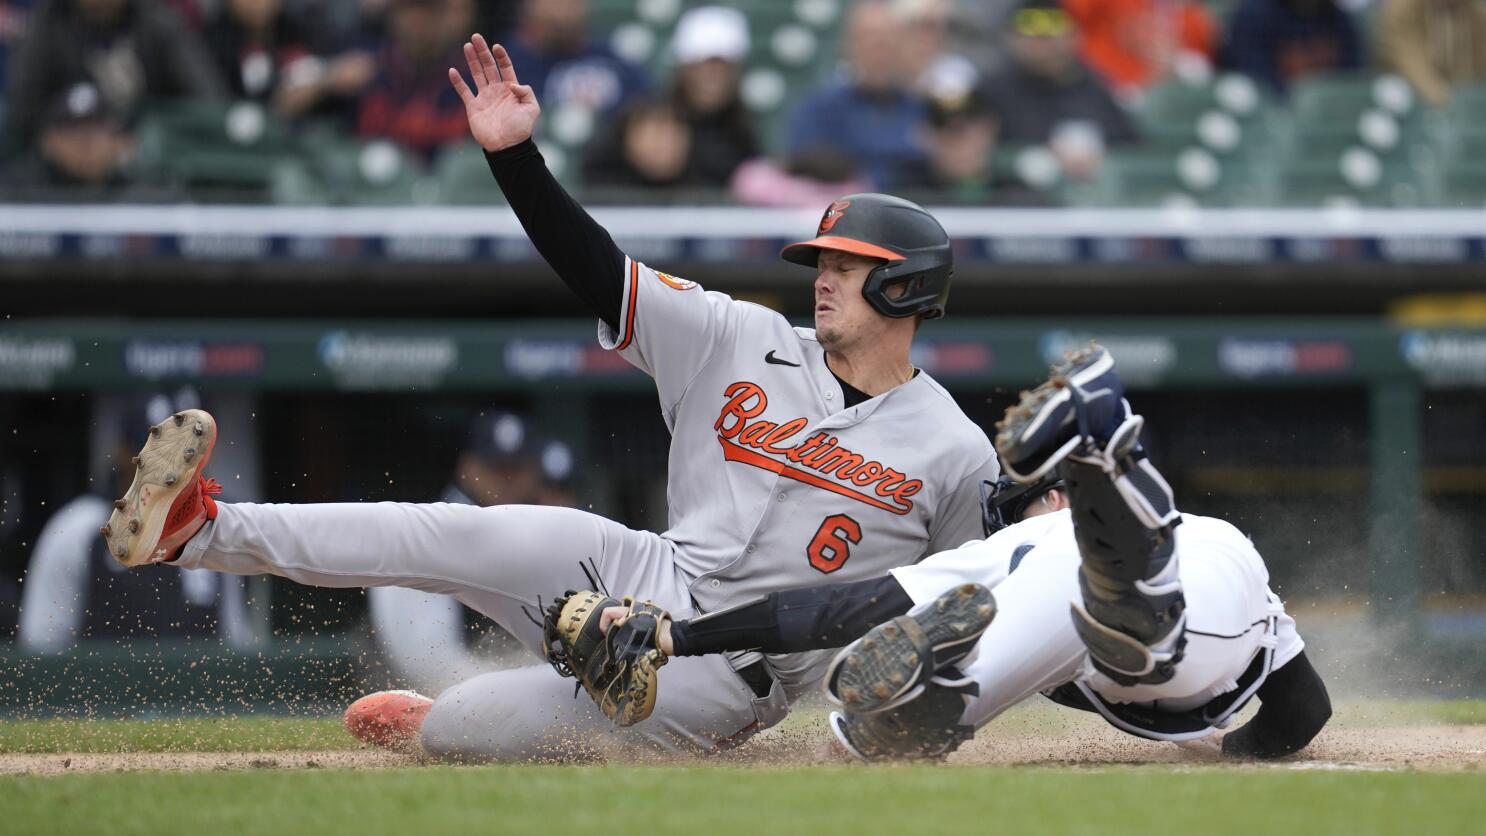 Matt Vierling of the Detroit Tigers slides safely into home plate